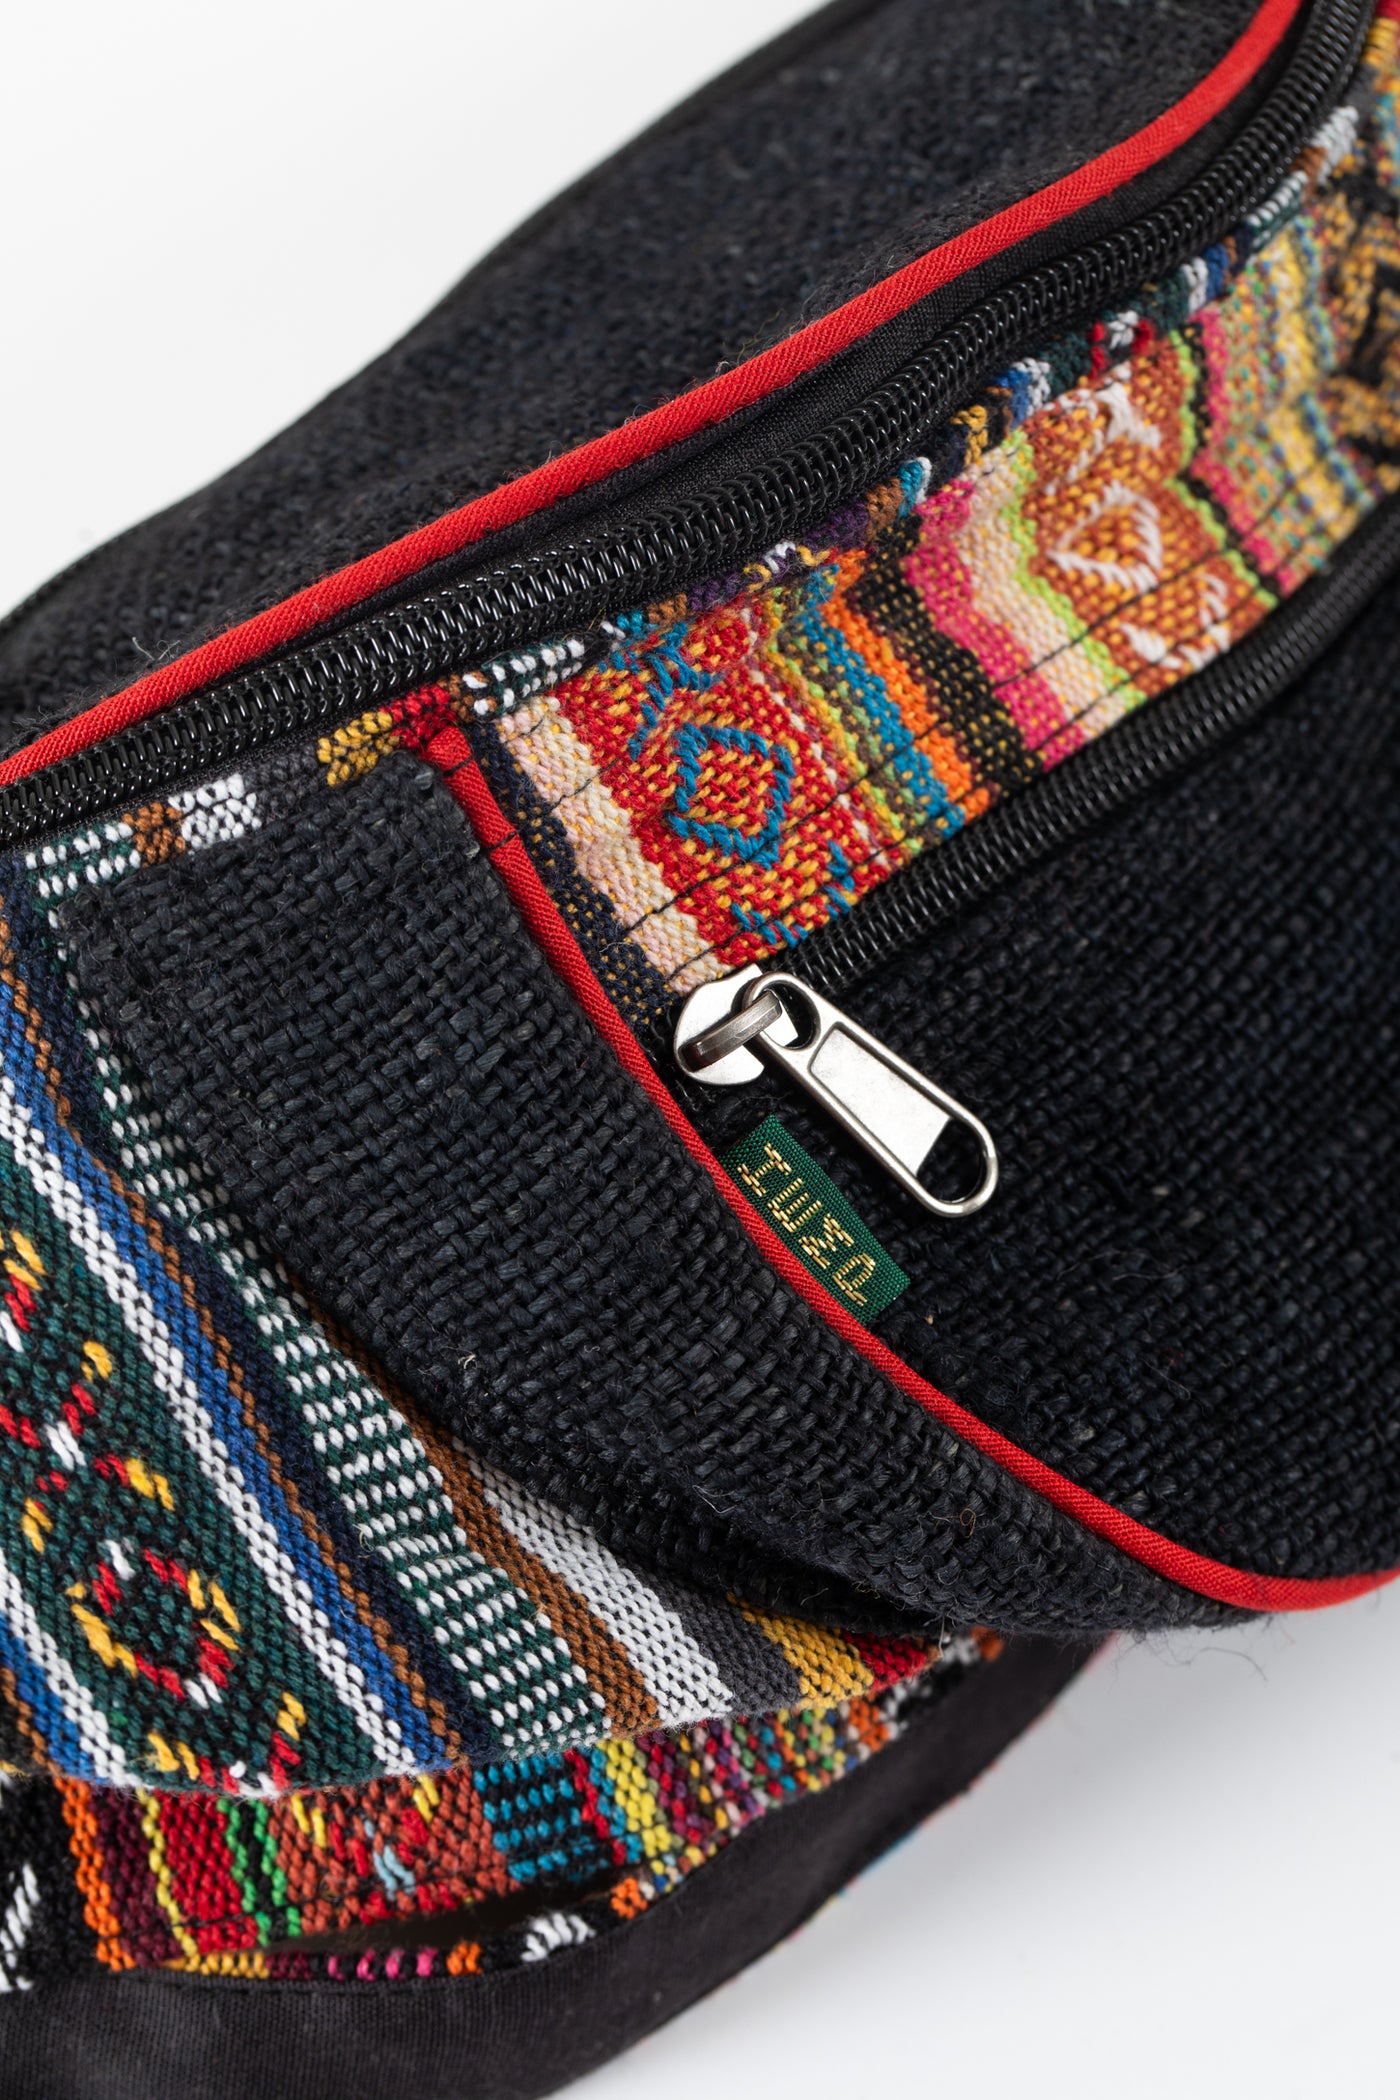 Gherry Hemp Fanny Pack Black with Multicolor Details